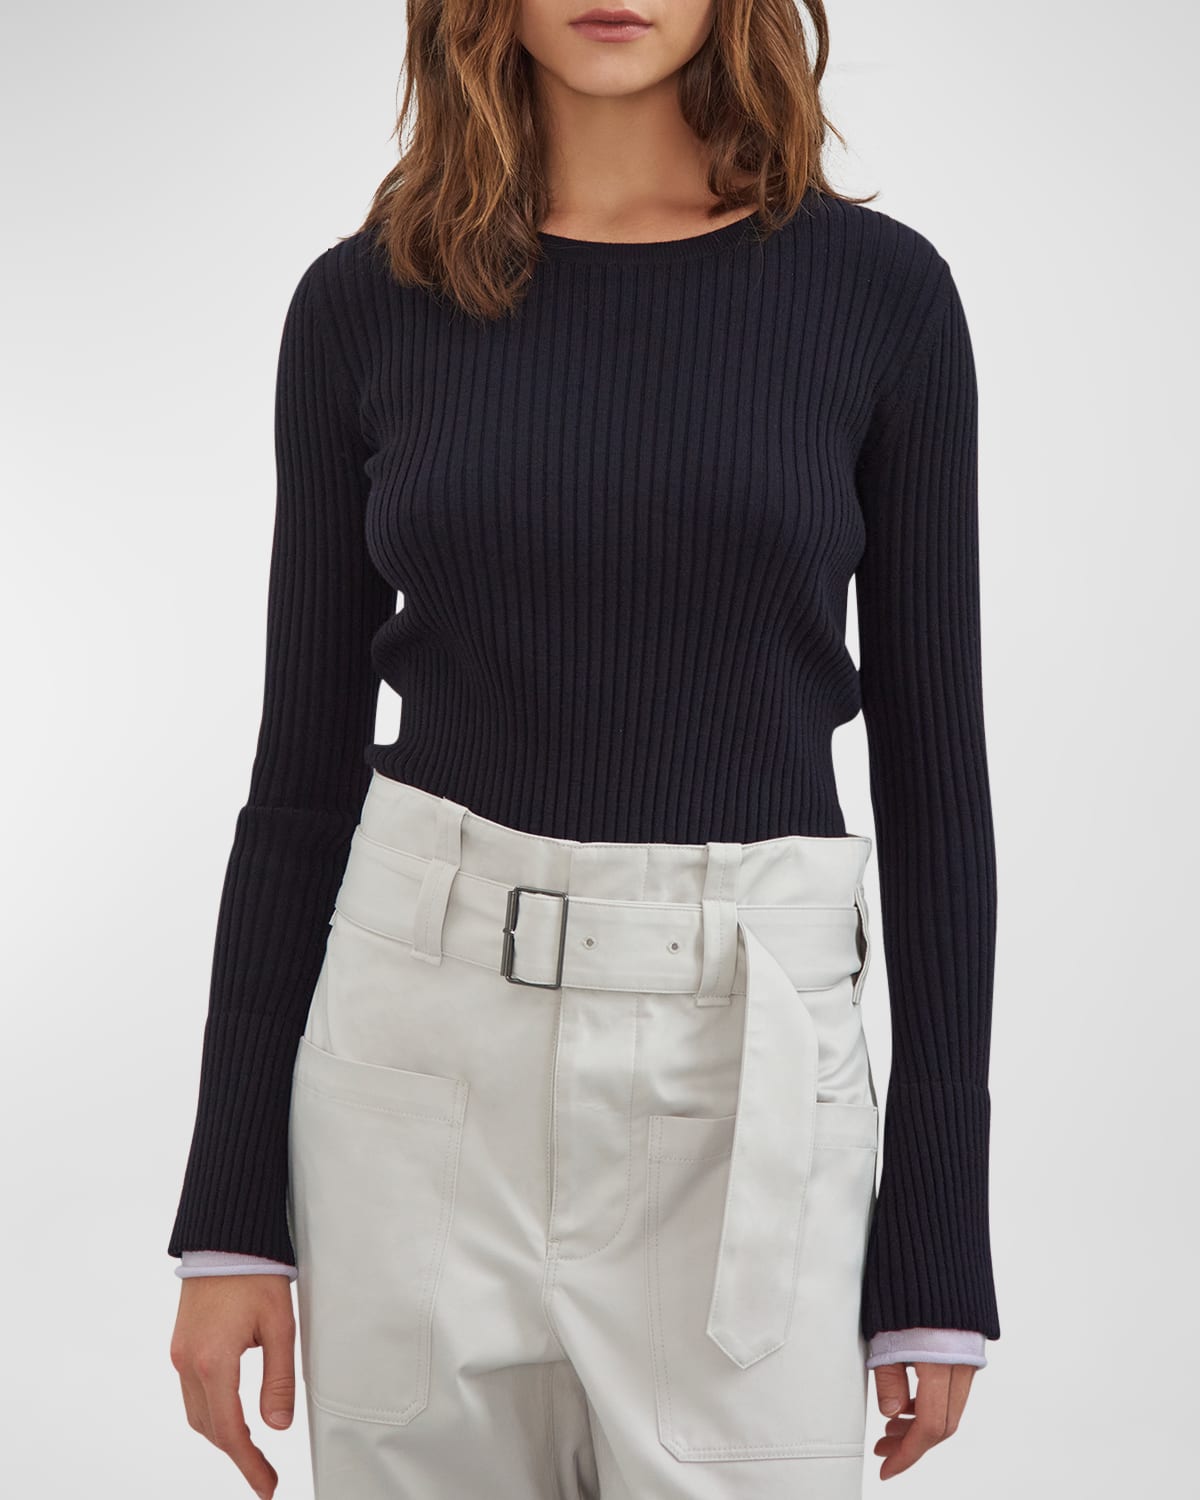 The Mercer Knit Top